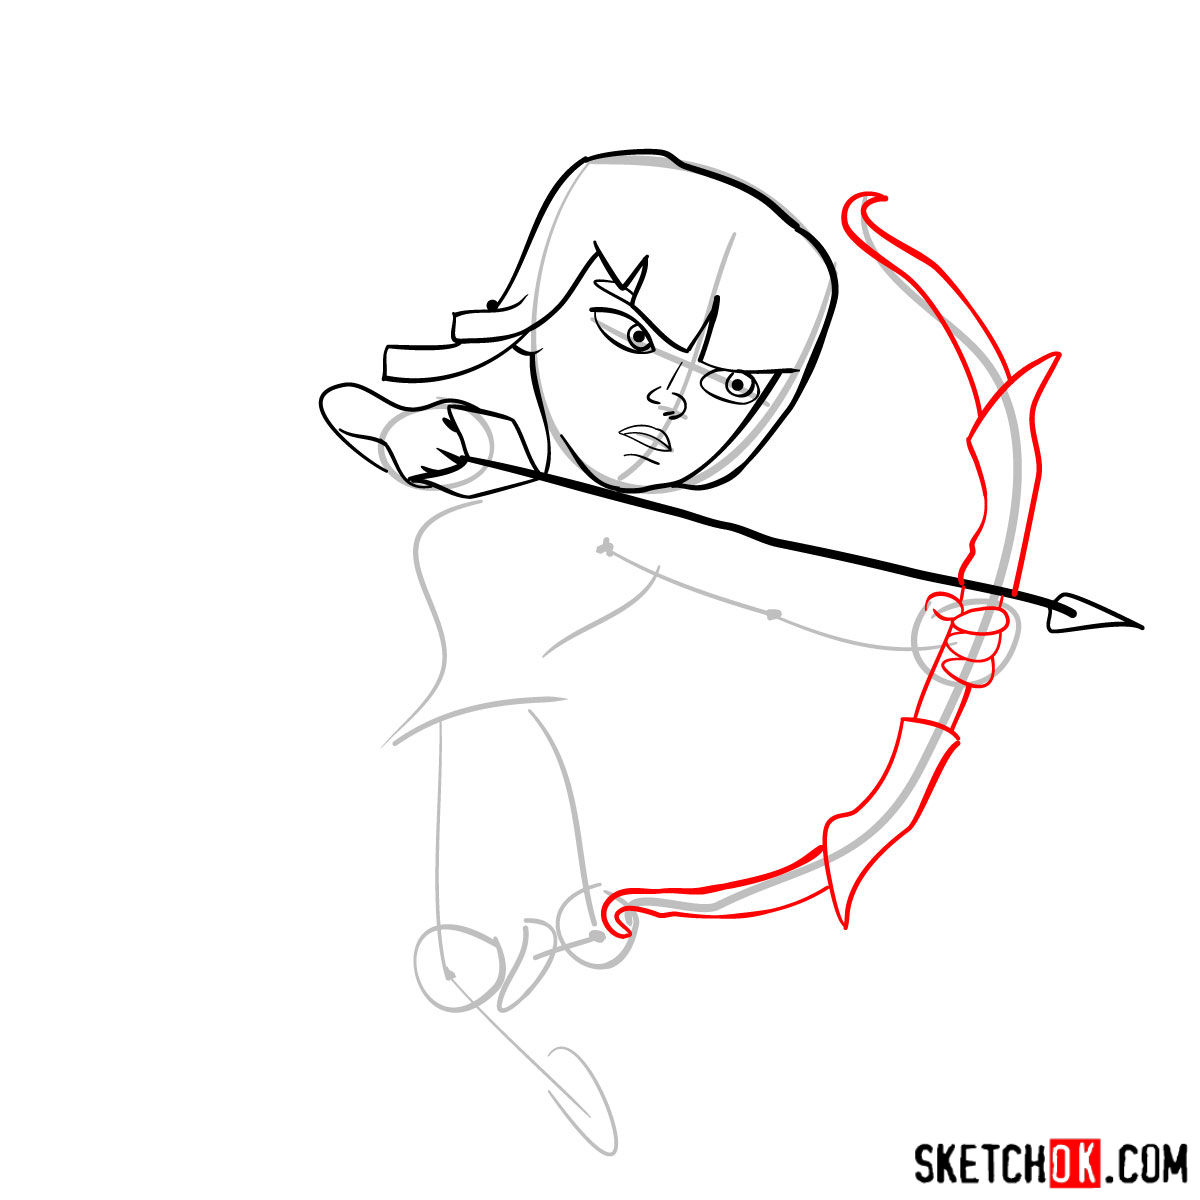 How to draw Archer from Clash of Clans - step 05